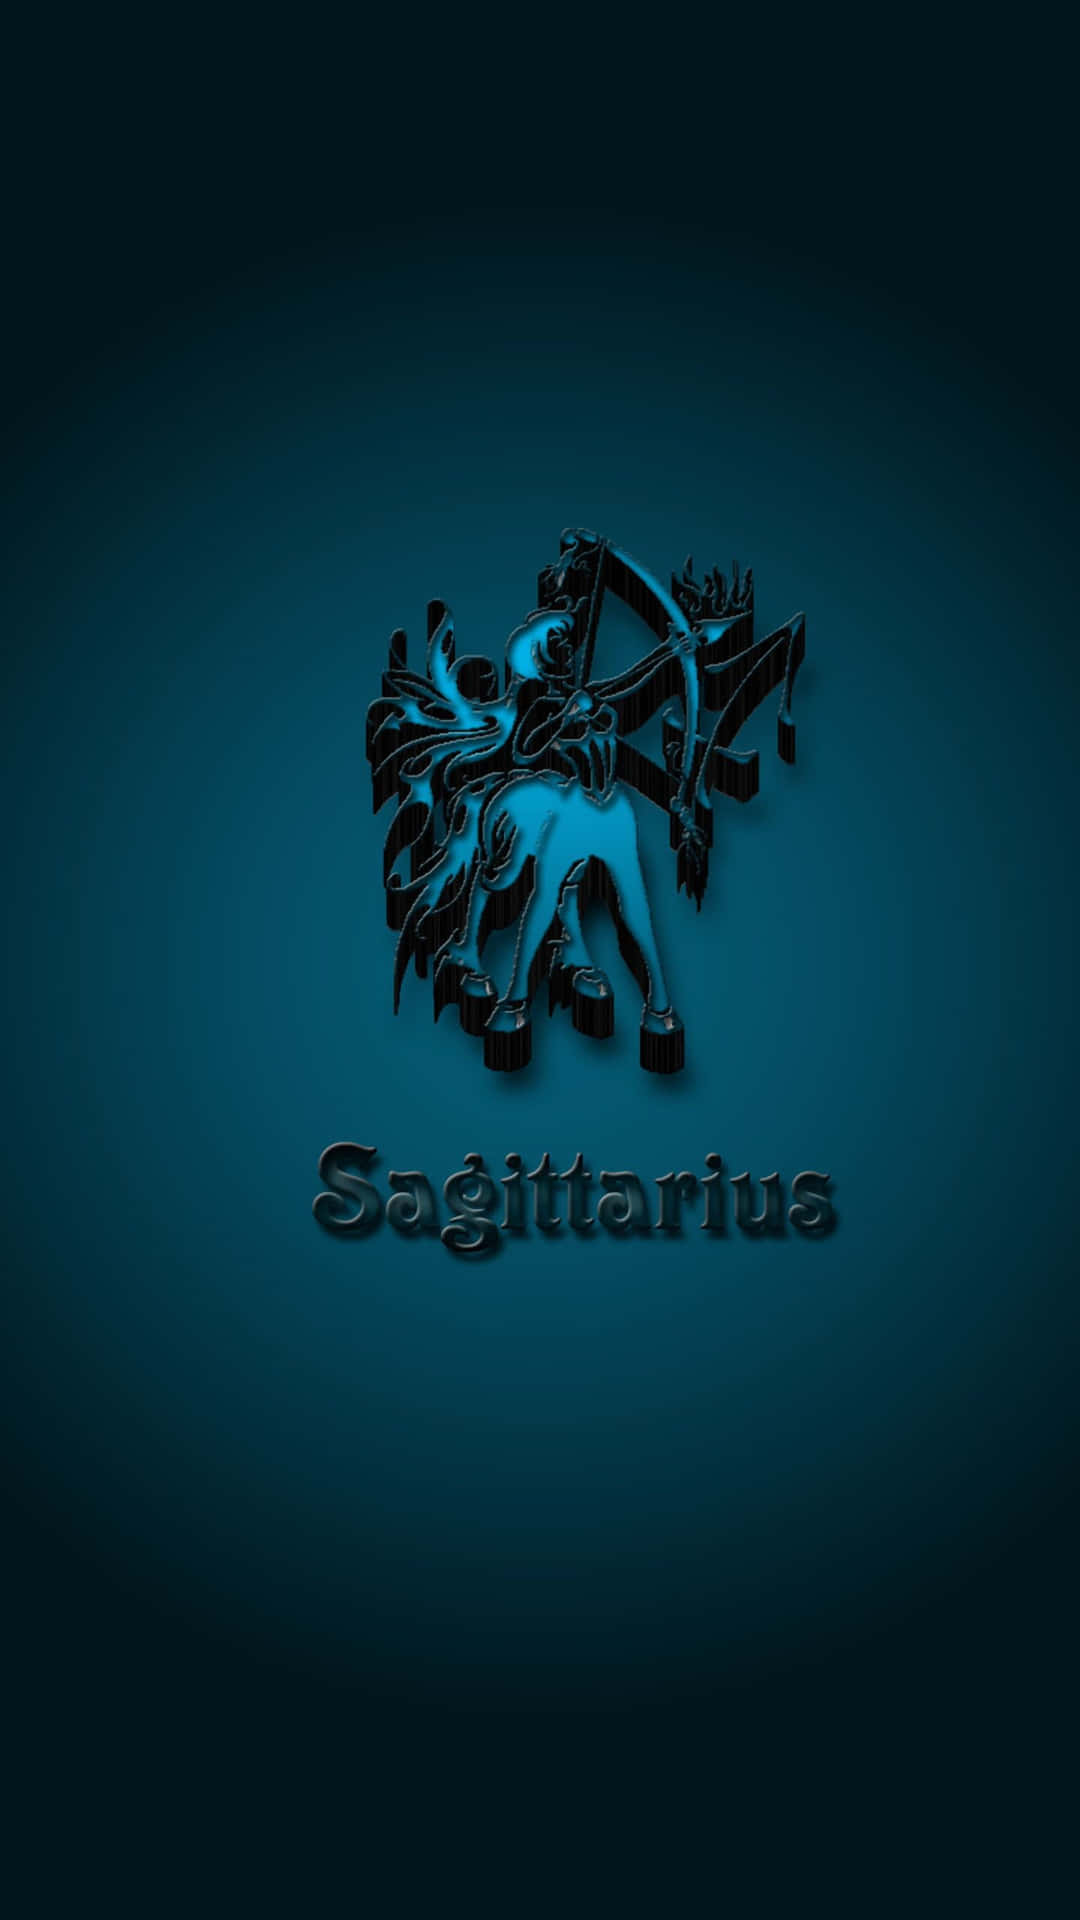 Follow the path of the Sagittarius and find your inspiration. Wallpaper